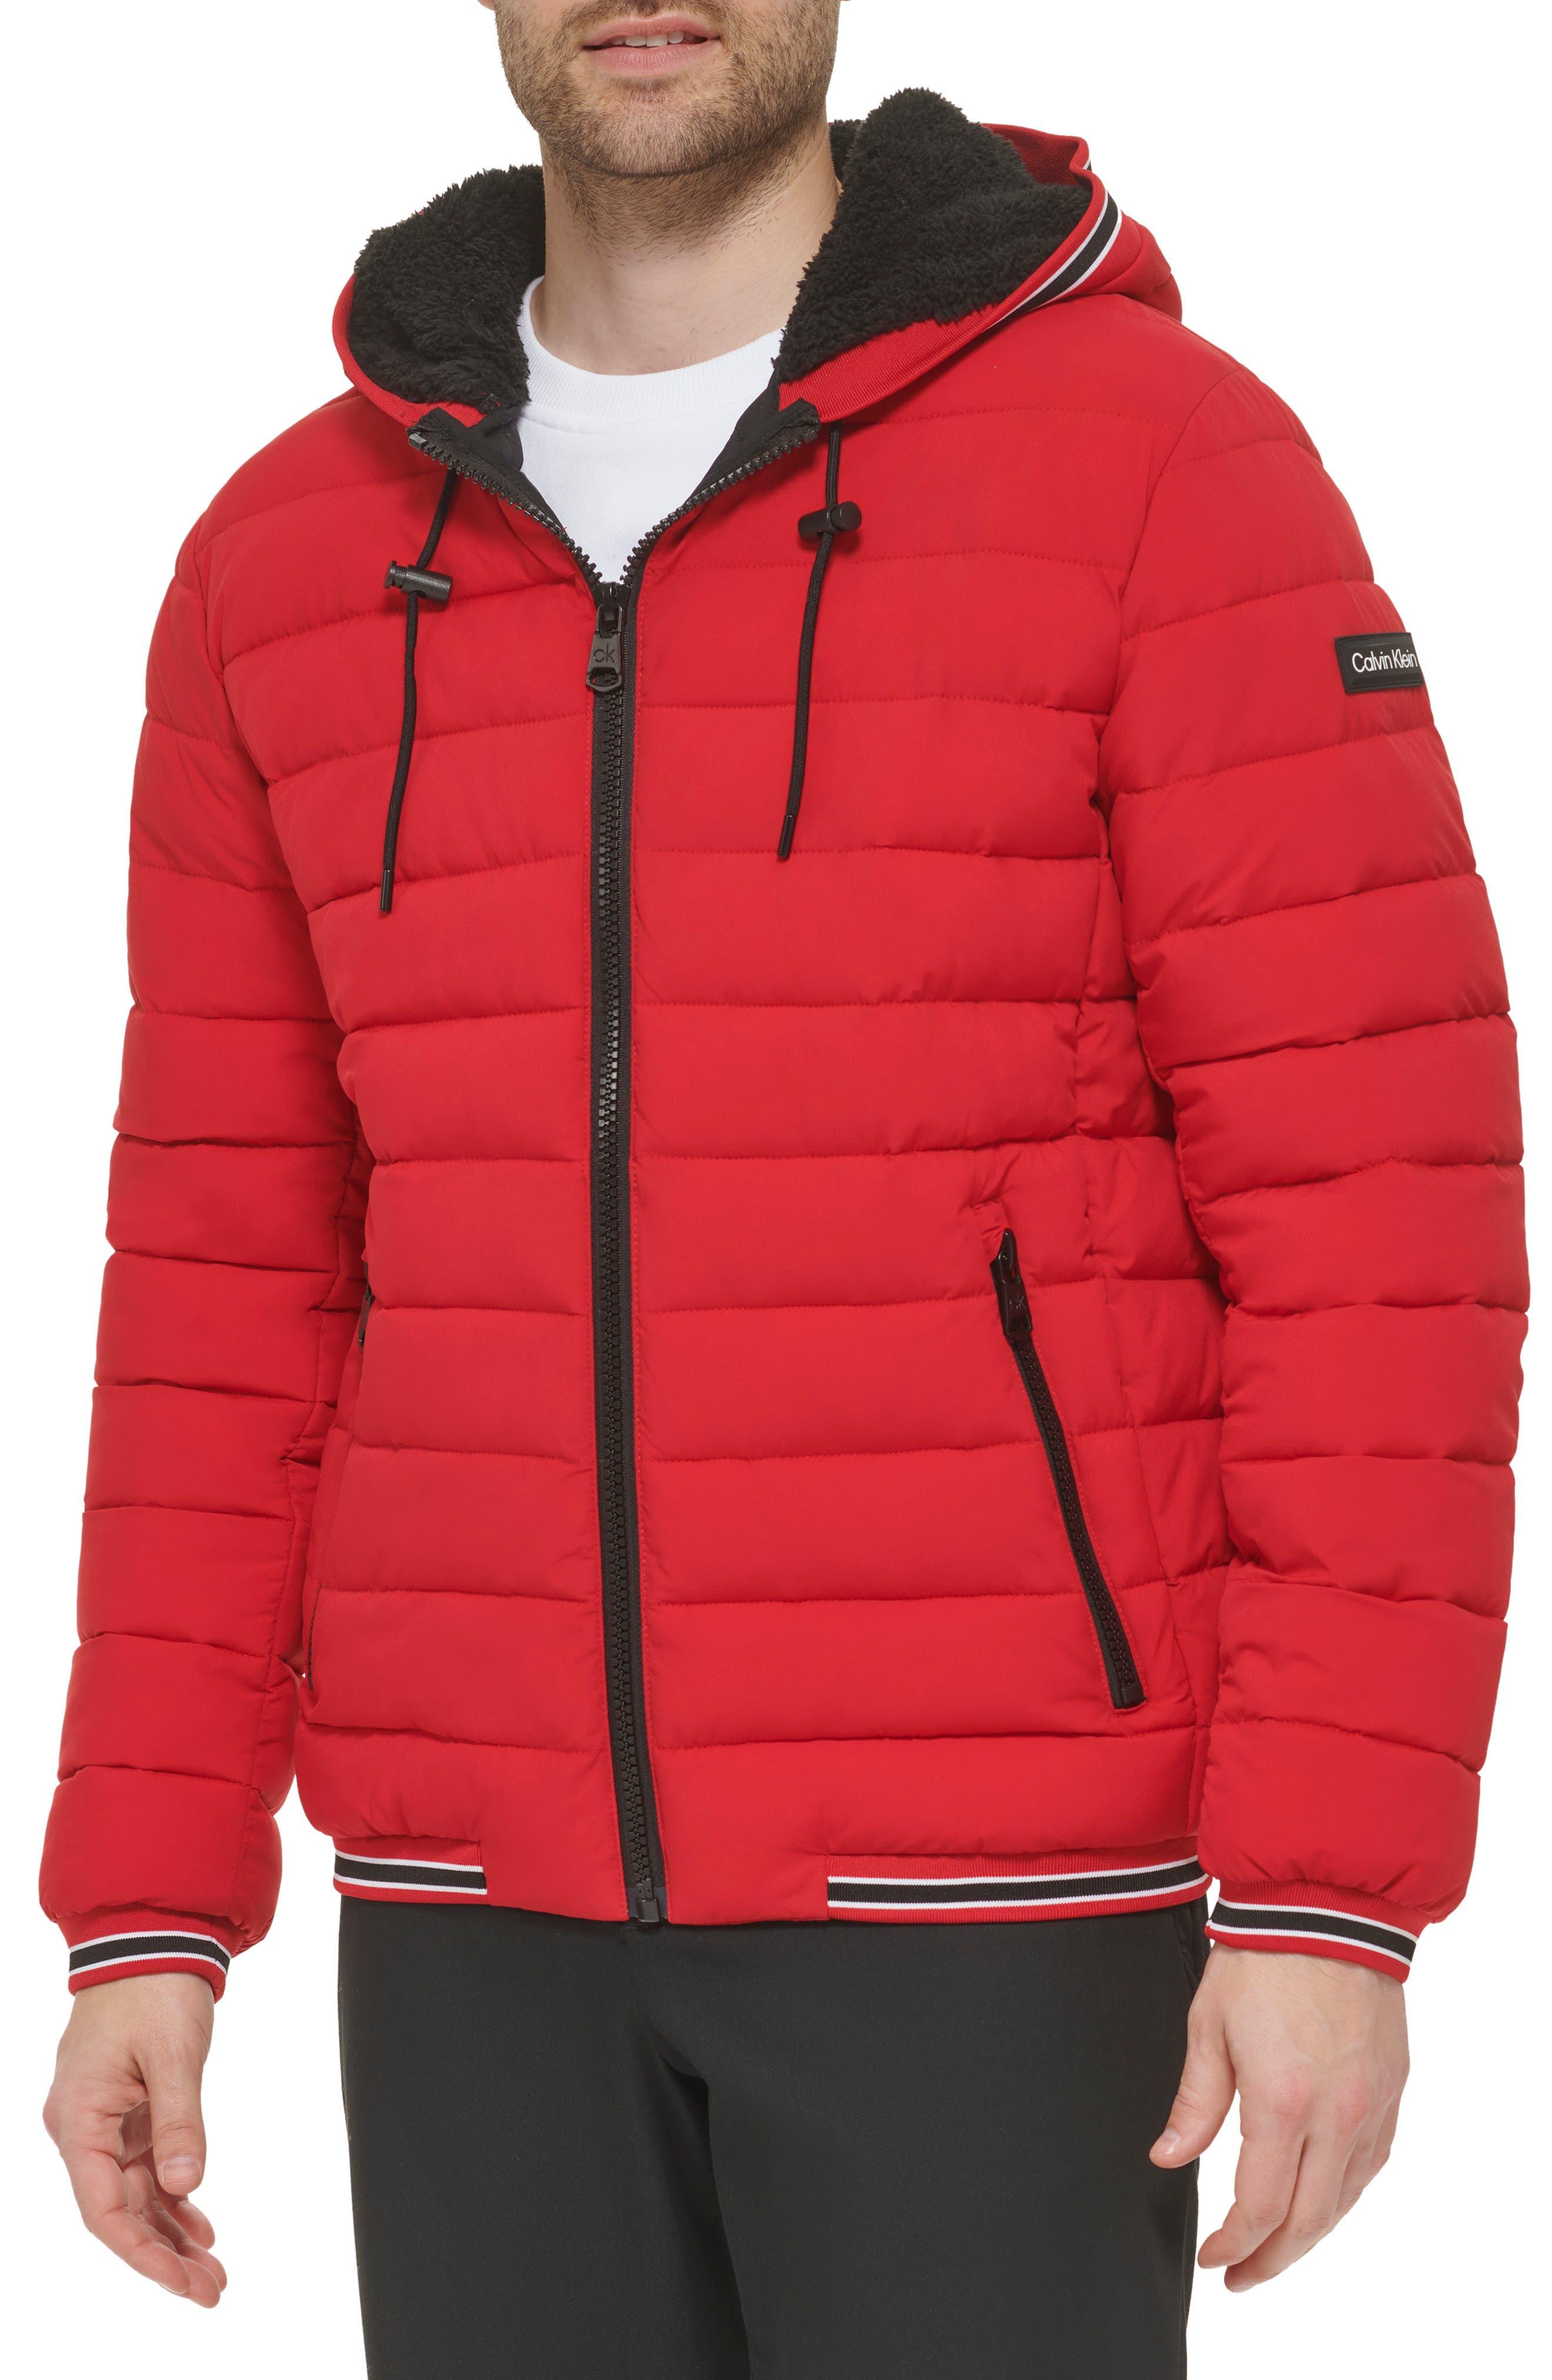 Calvin Klein Super Shine Fleece Lined Puffer Jacket In Deep Red At ...